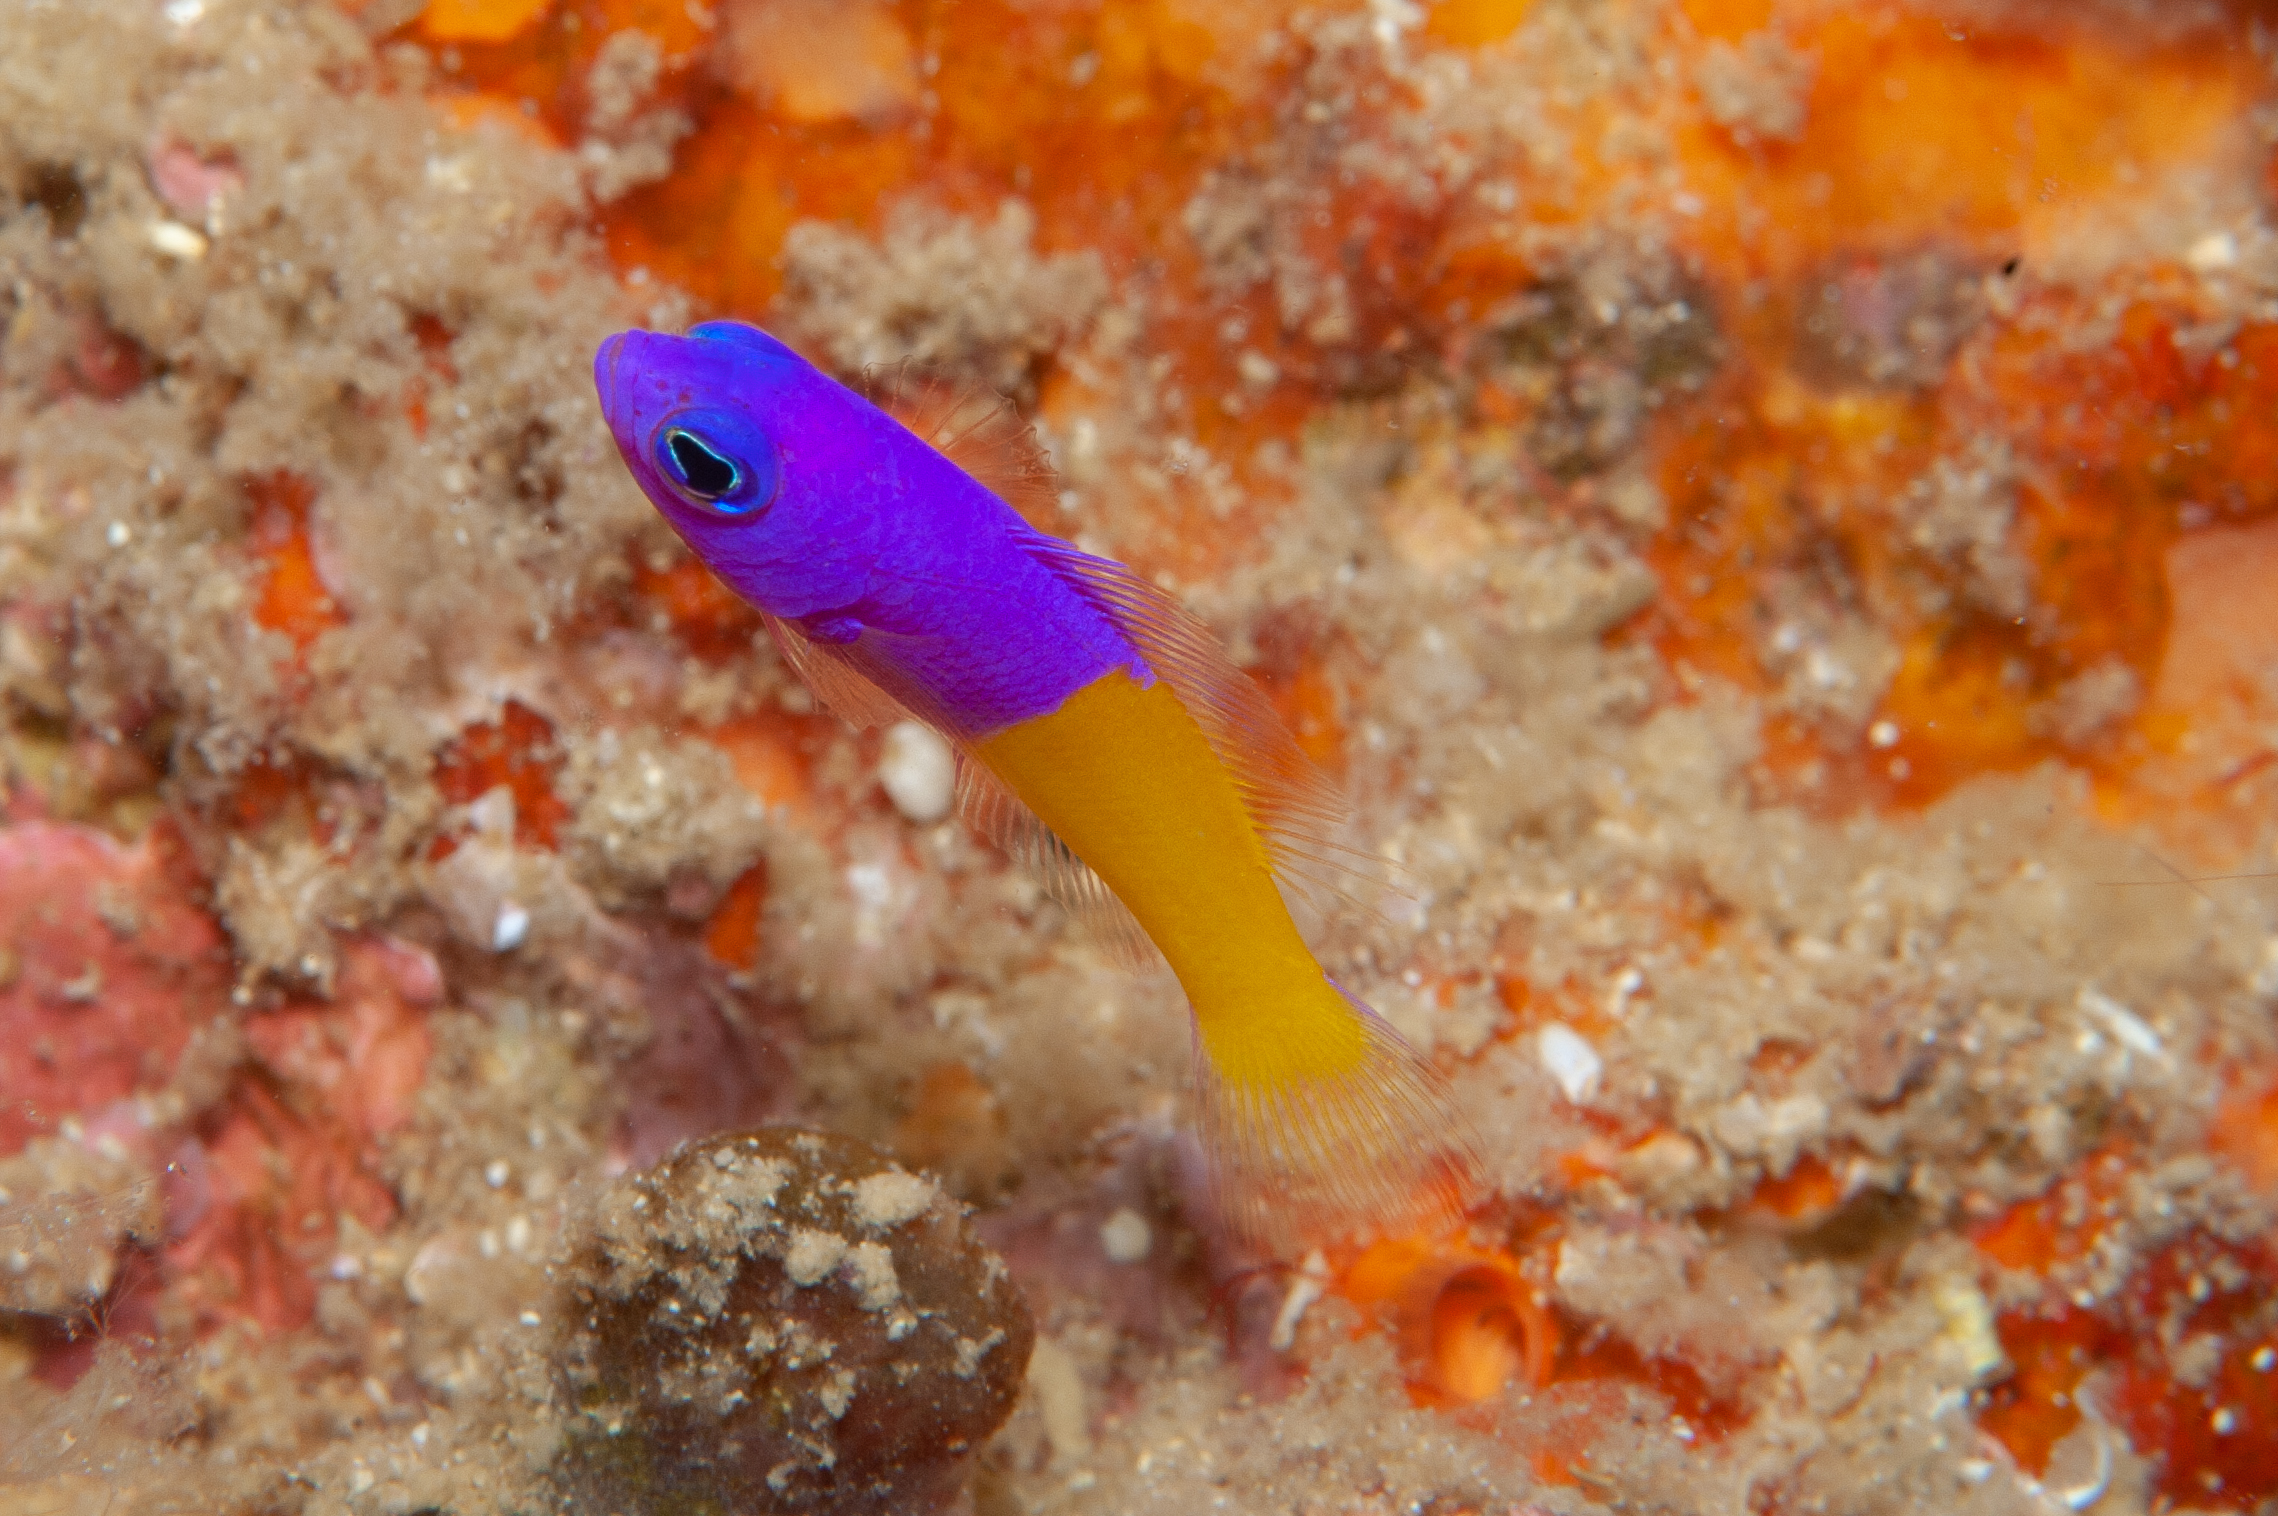 Royal dottyback - Pictichromis paccagnellae, Restorf, Kimbe Bay